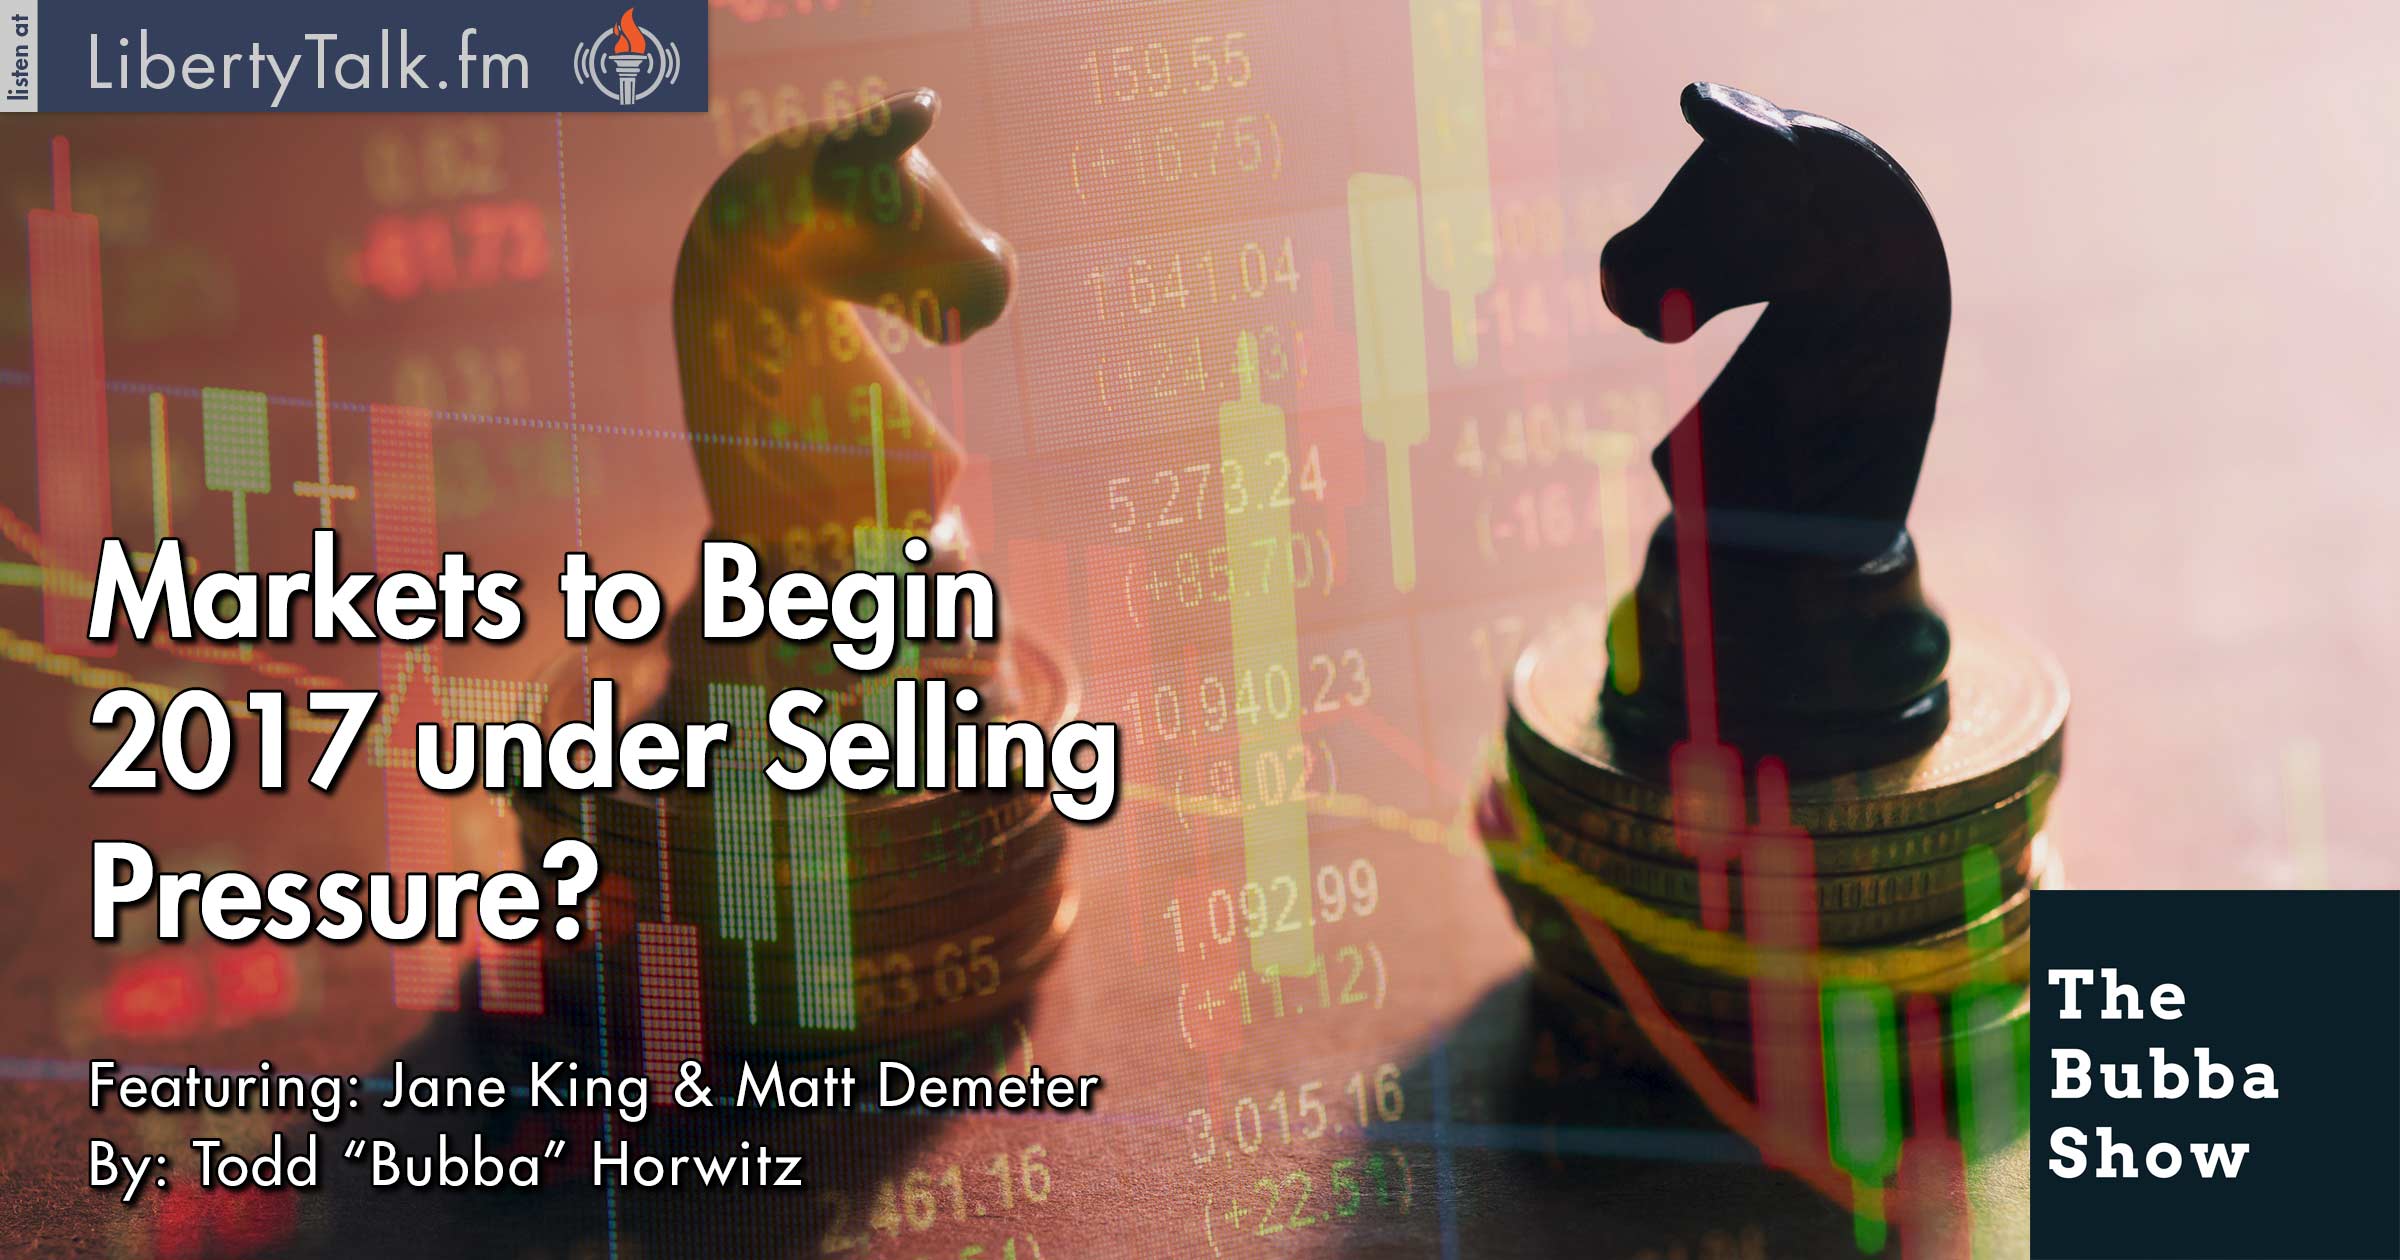 Markets to Begin 2017 under Selling Pressure? - The Bubba Show